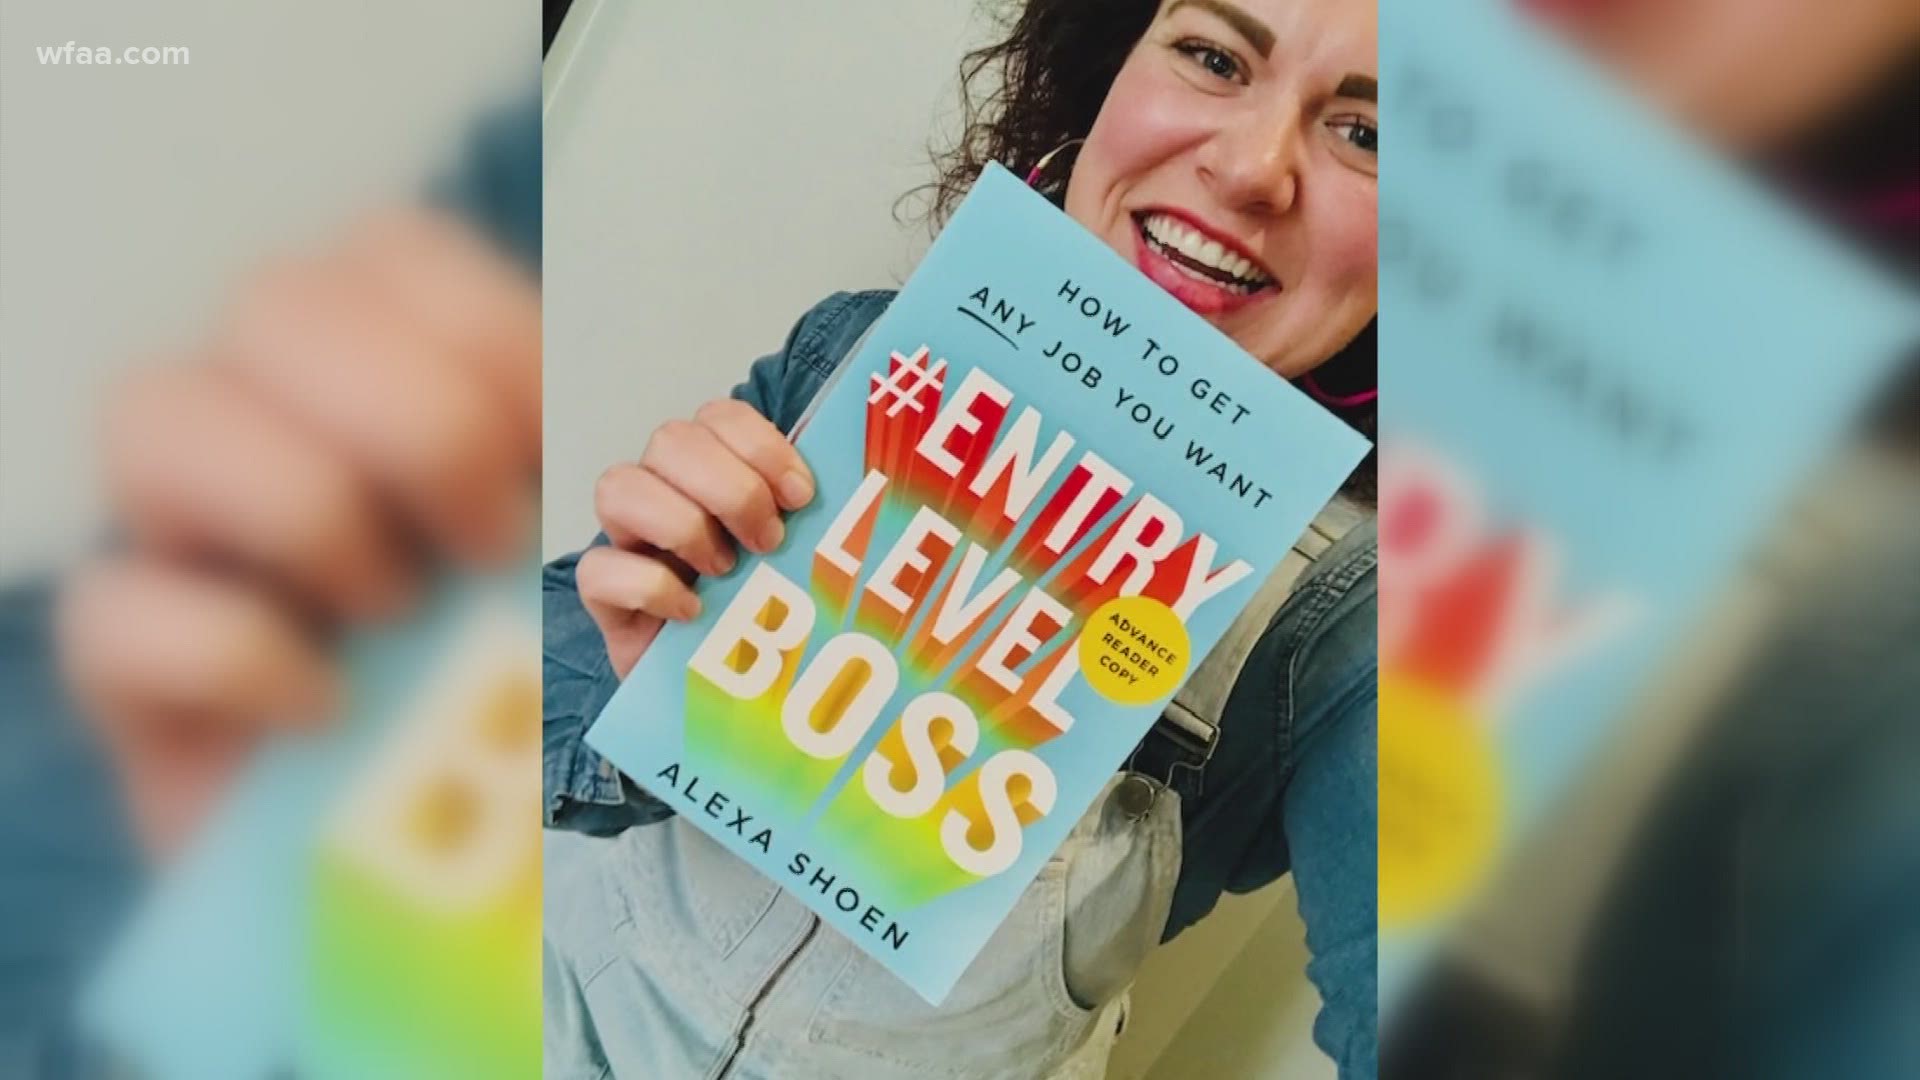 With no in-person networking events and hiring freezes throughout every industry, what are job seekers to do? Author of #EntryLevelBoss, Alexa Shoen, has some ideas.